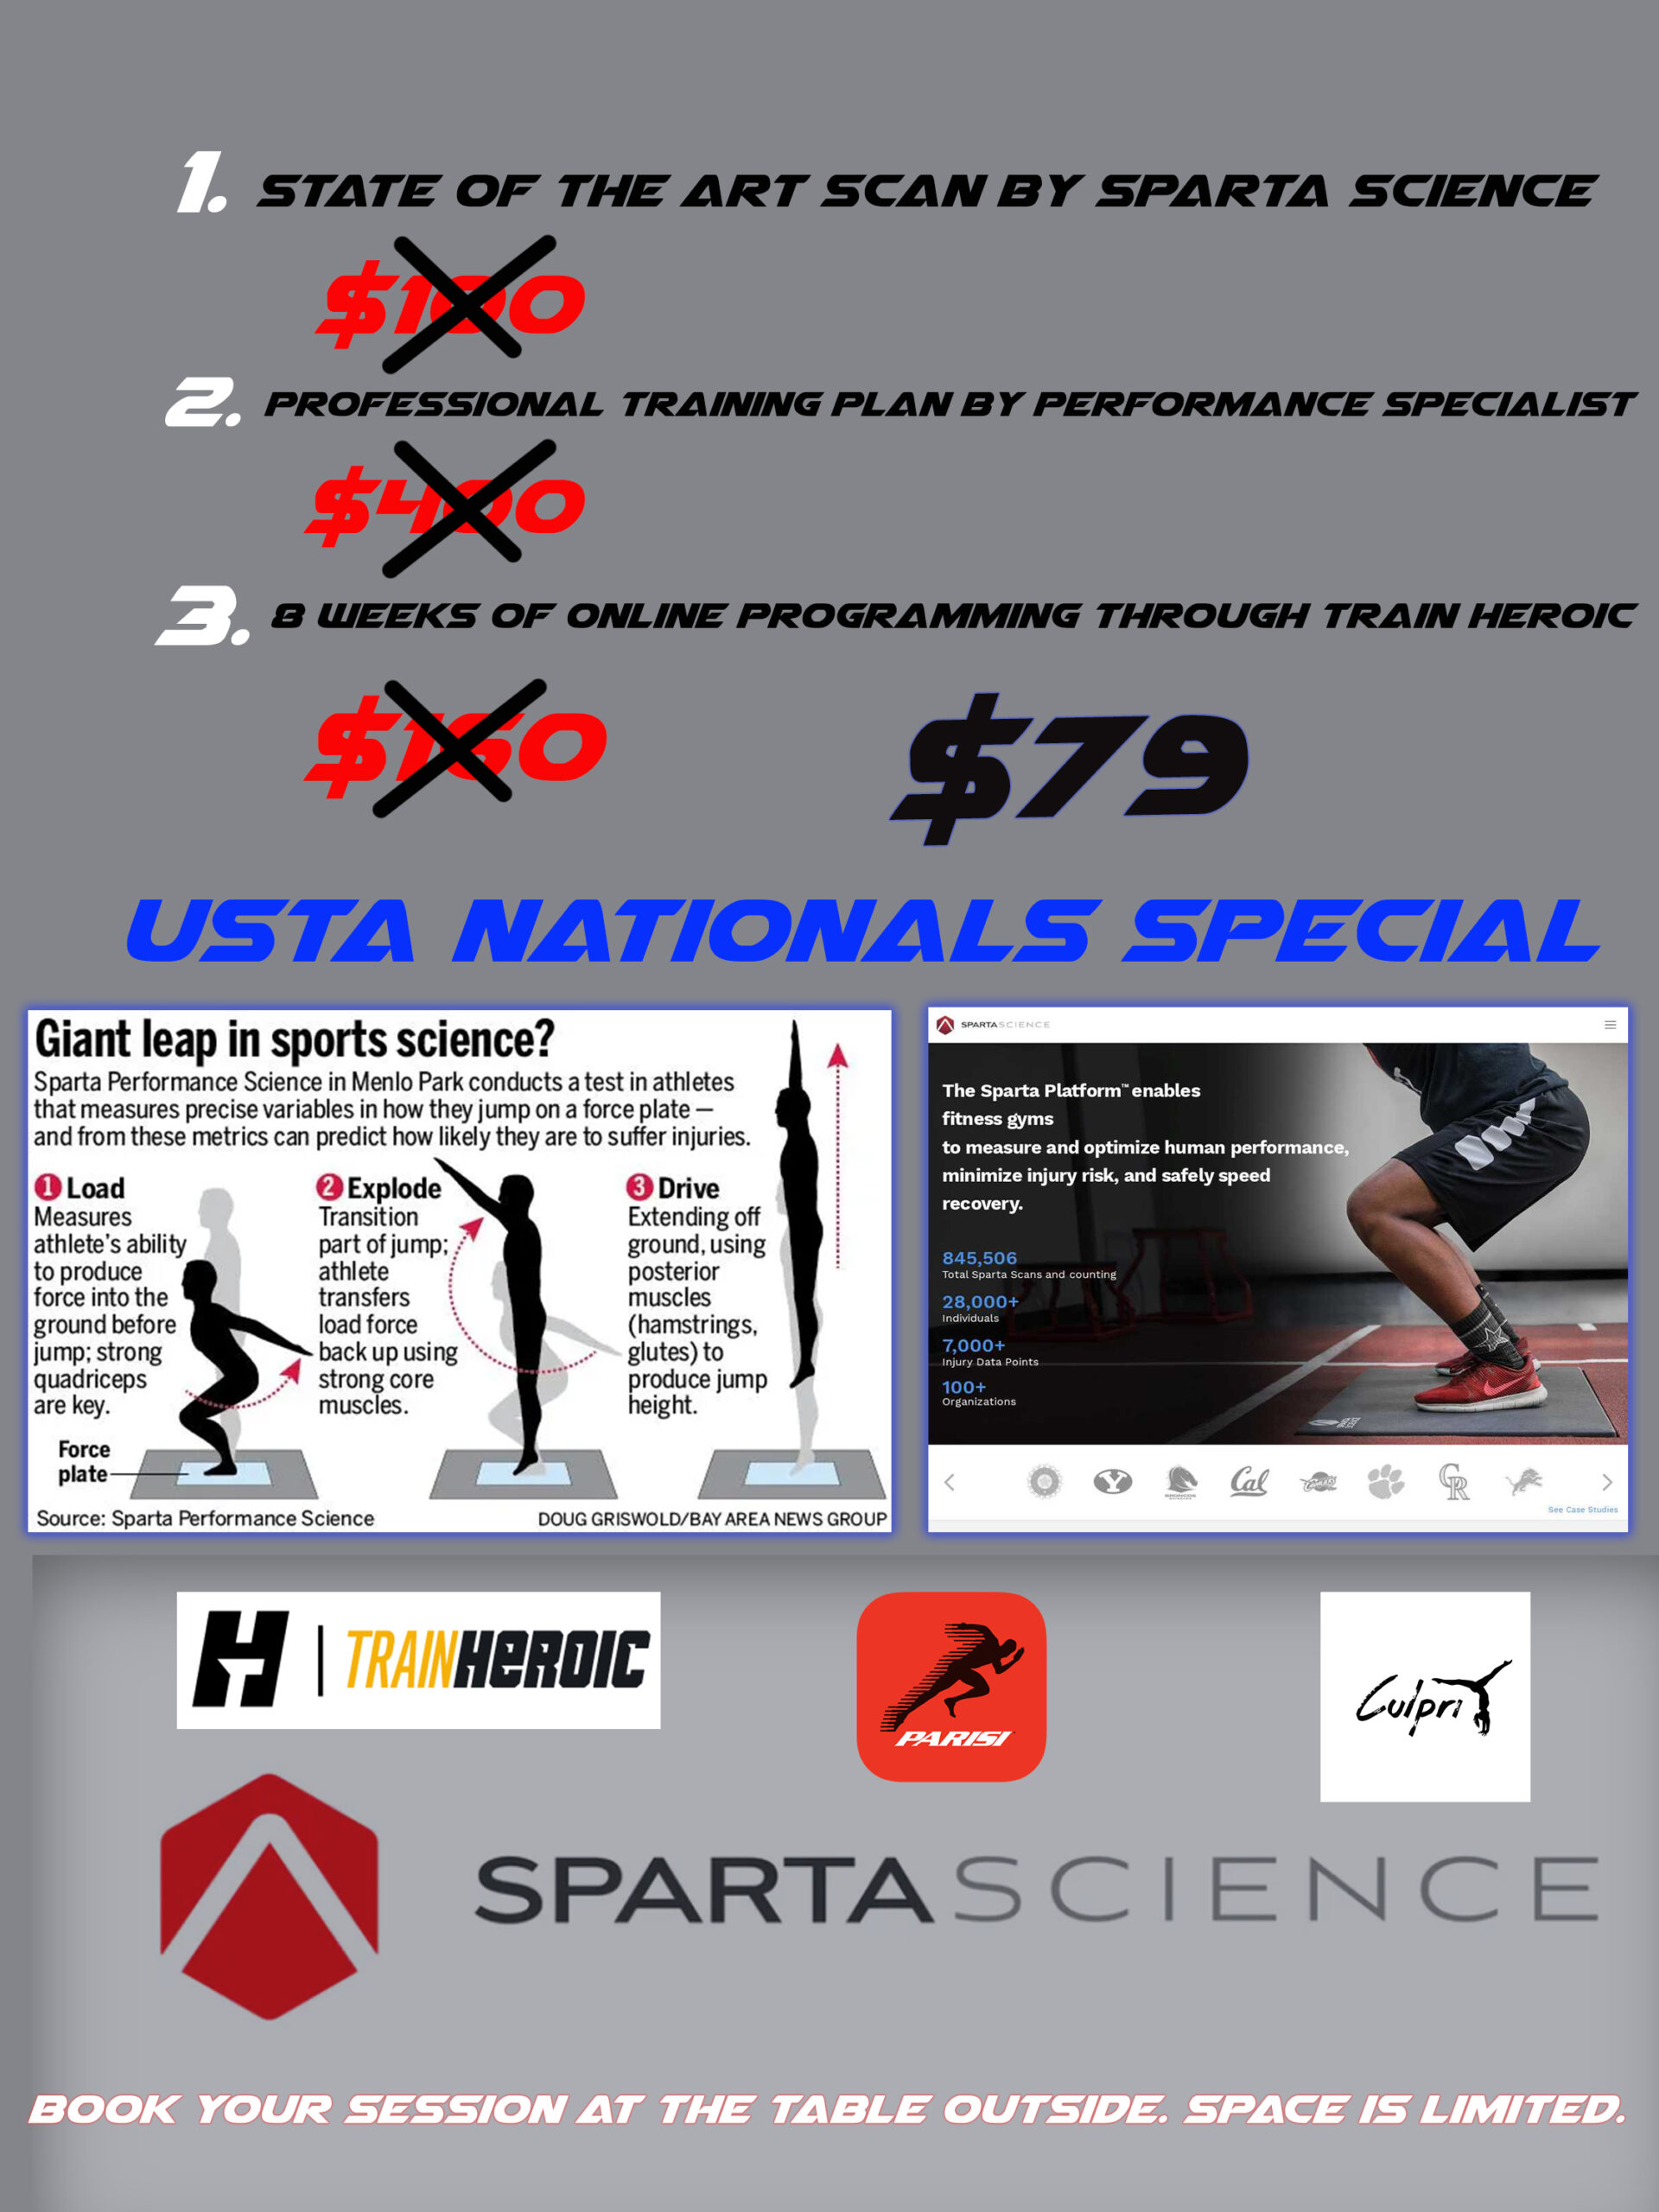 Sparta Scan comes to USTA Nationals!